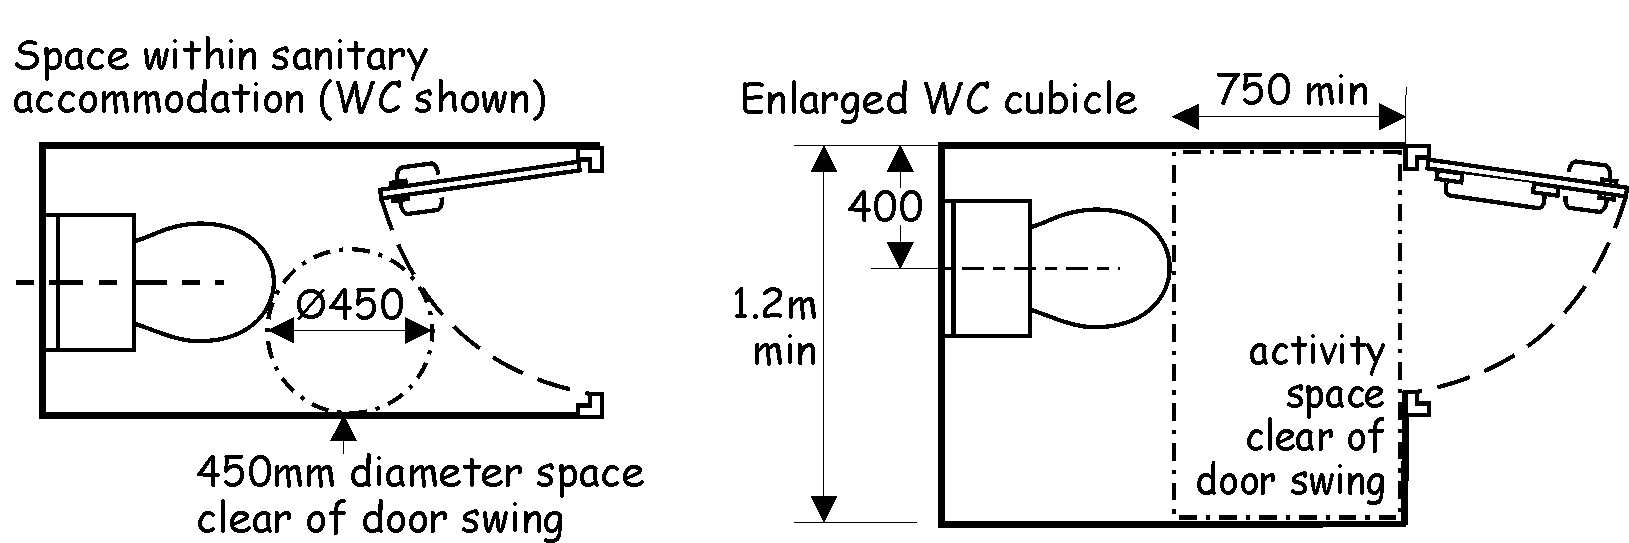 Space within sanitary accommodation and enlarged WC Cubicle